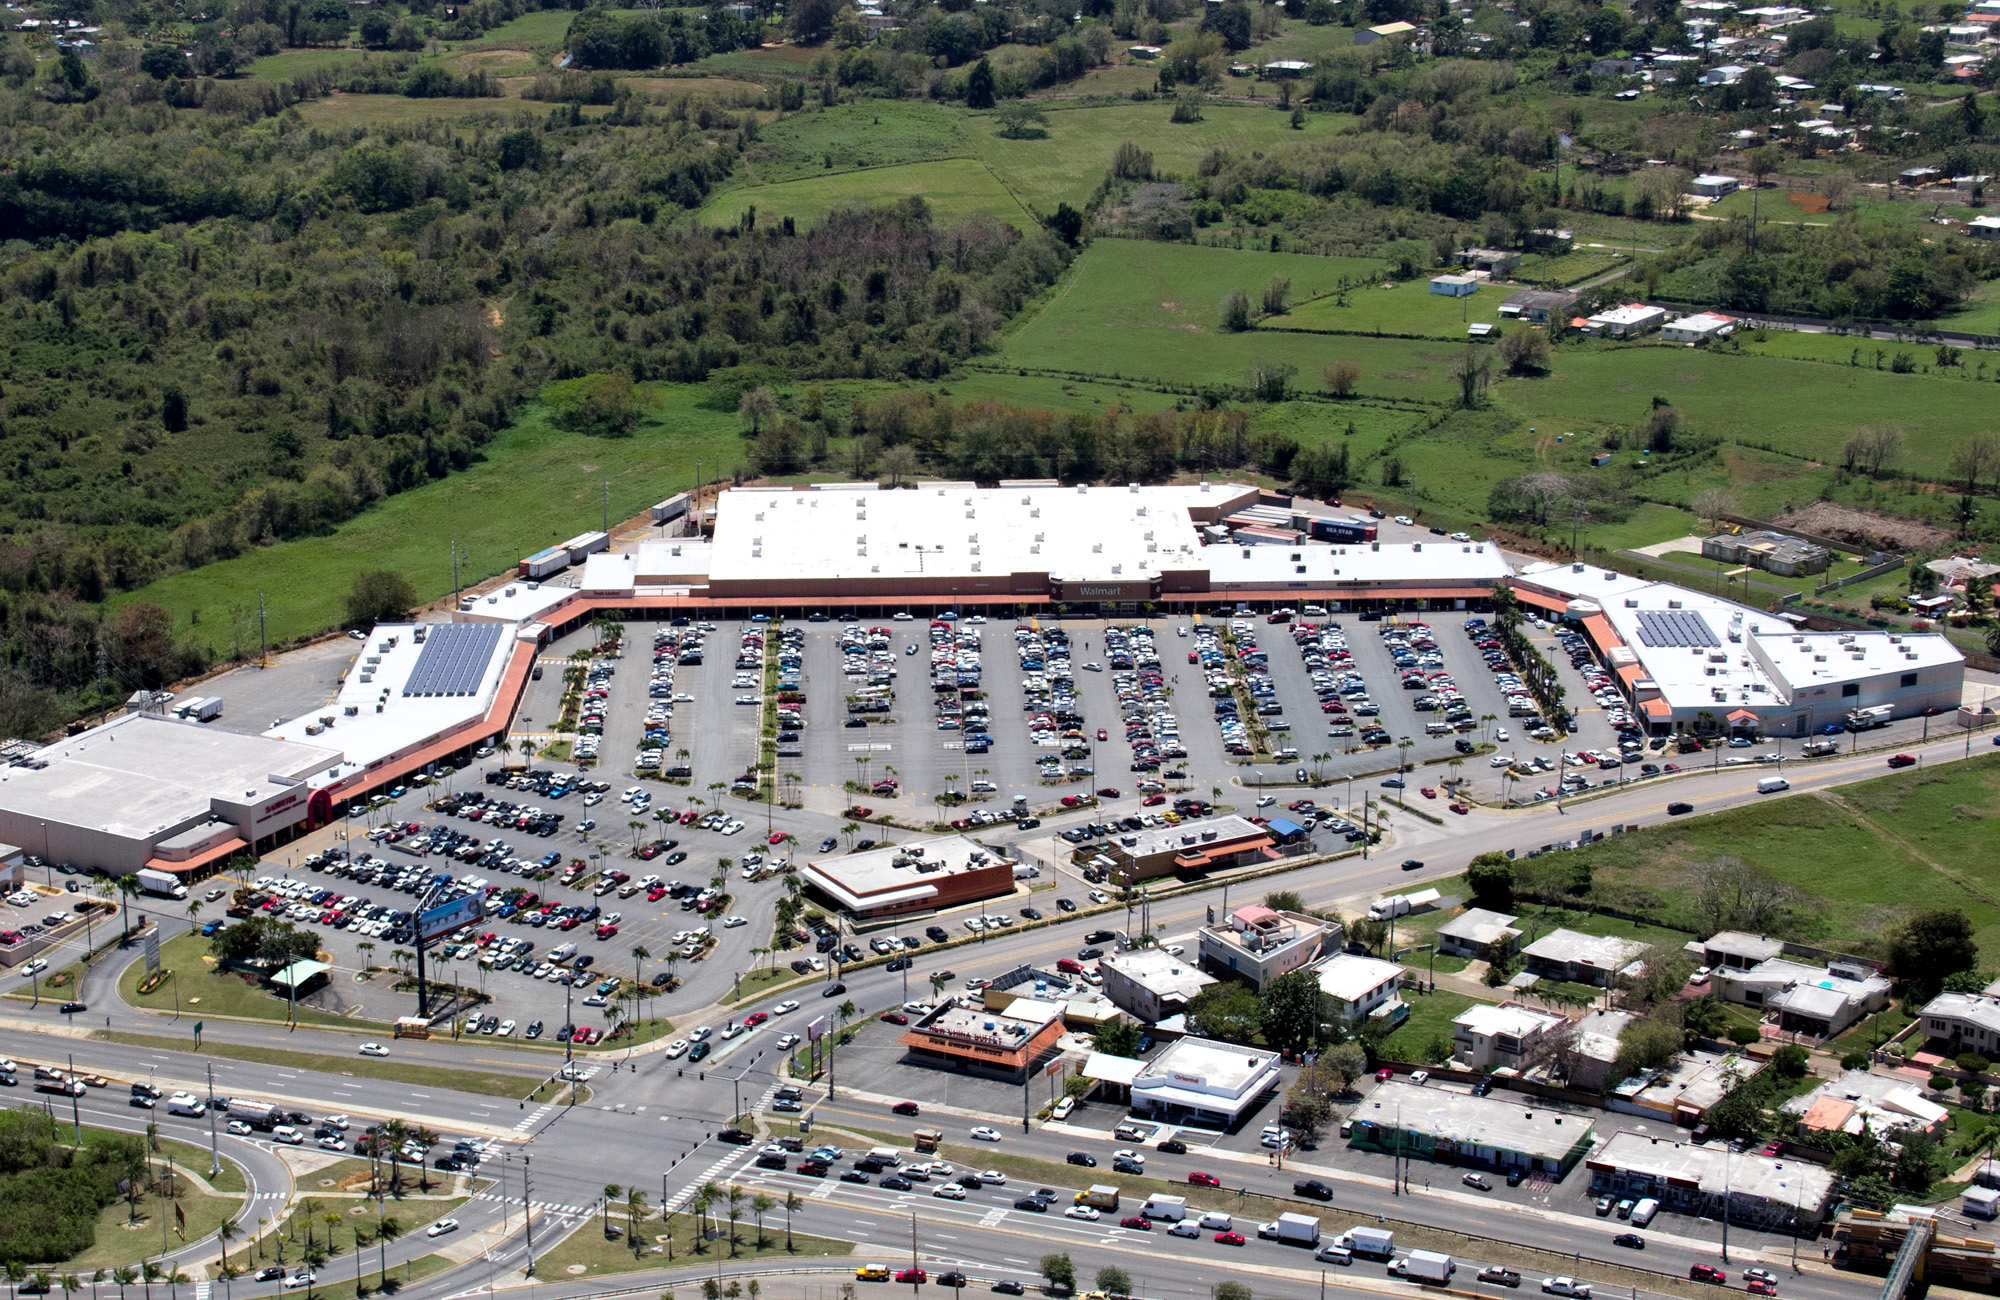 Other Shopping Centers